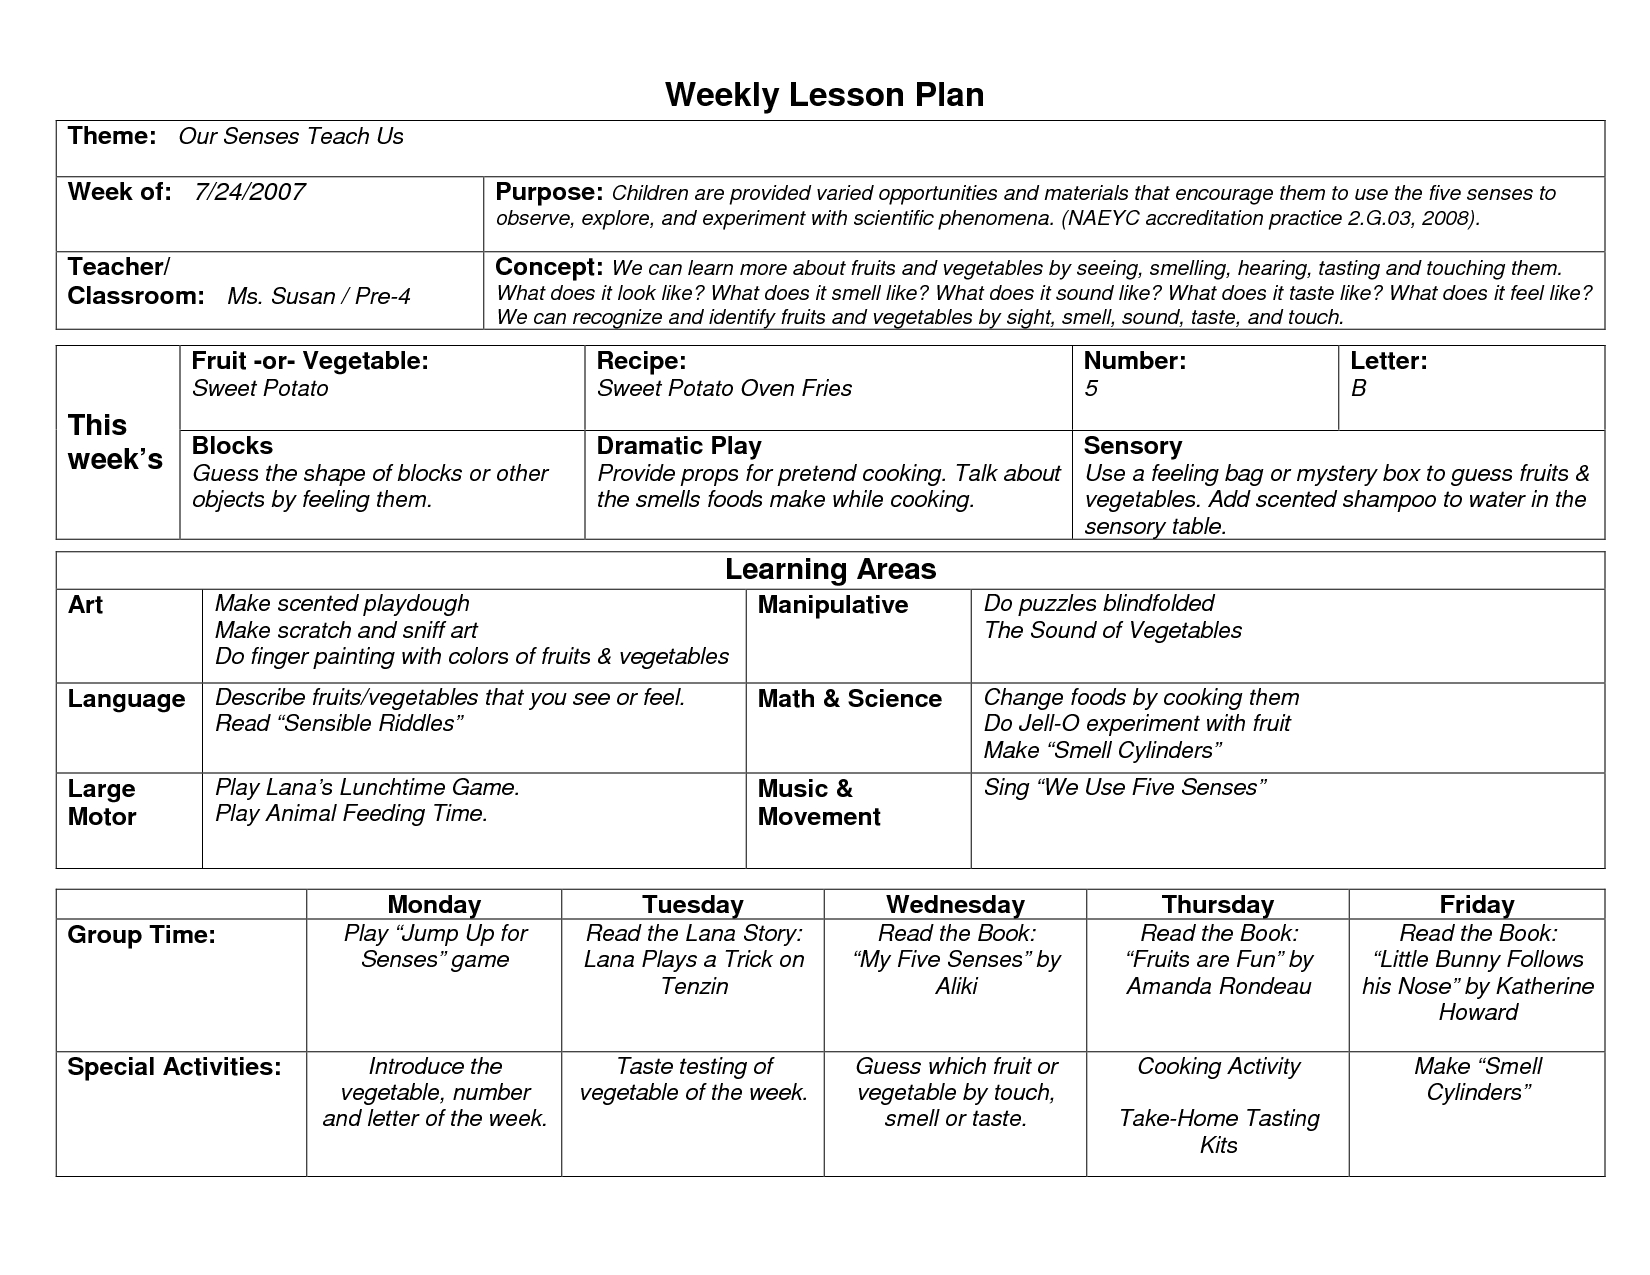 Naeyc Lesson Plan Template For Preschool | Sample Weekly